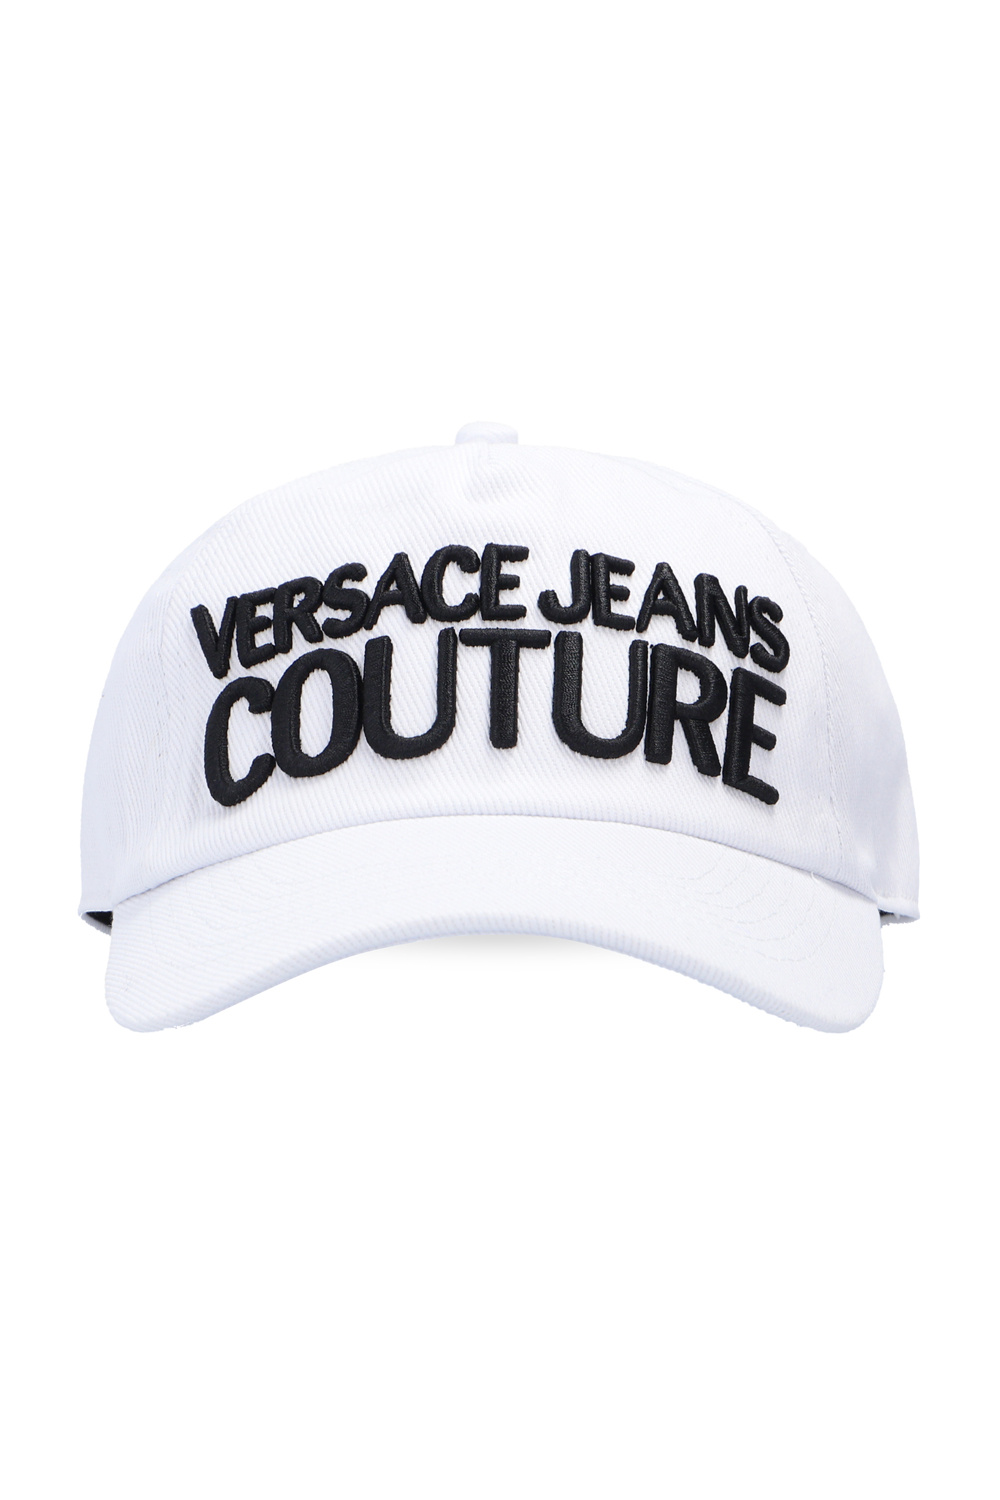 Versace Jeans Couture New Era NBA City Local 59FIFTY Fitted Caps to Match the Air Jordan 13 Lucky Green